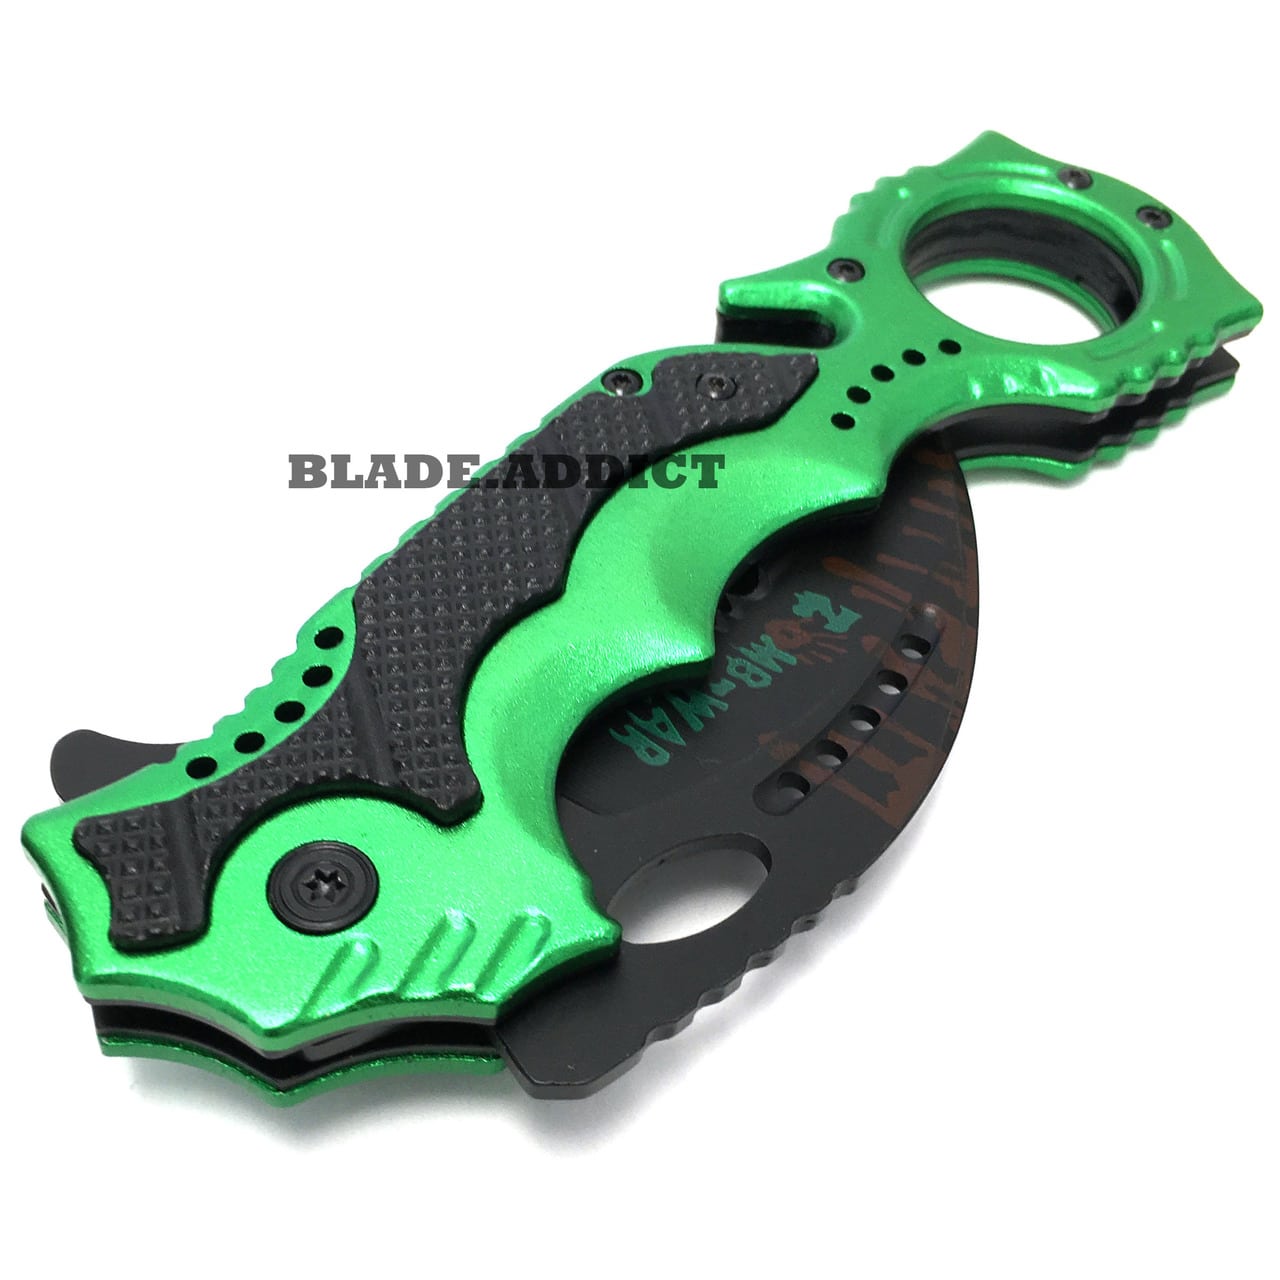 3PC 8" KARAMBIT Hawkbill Tactical Claw Spring Assisted Pocket Knife Rescue Blade